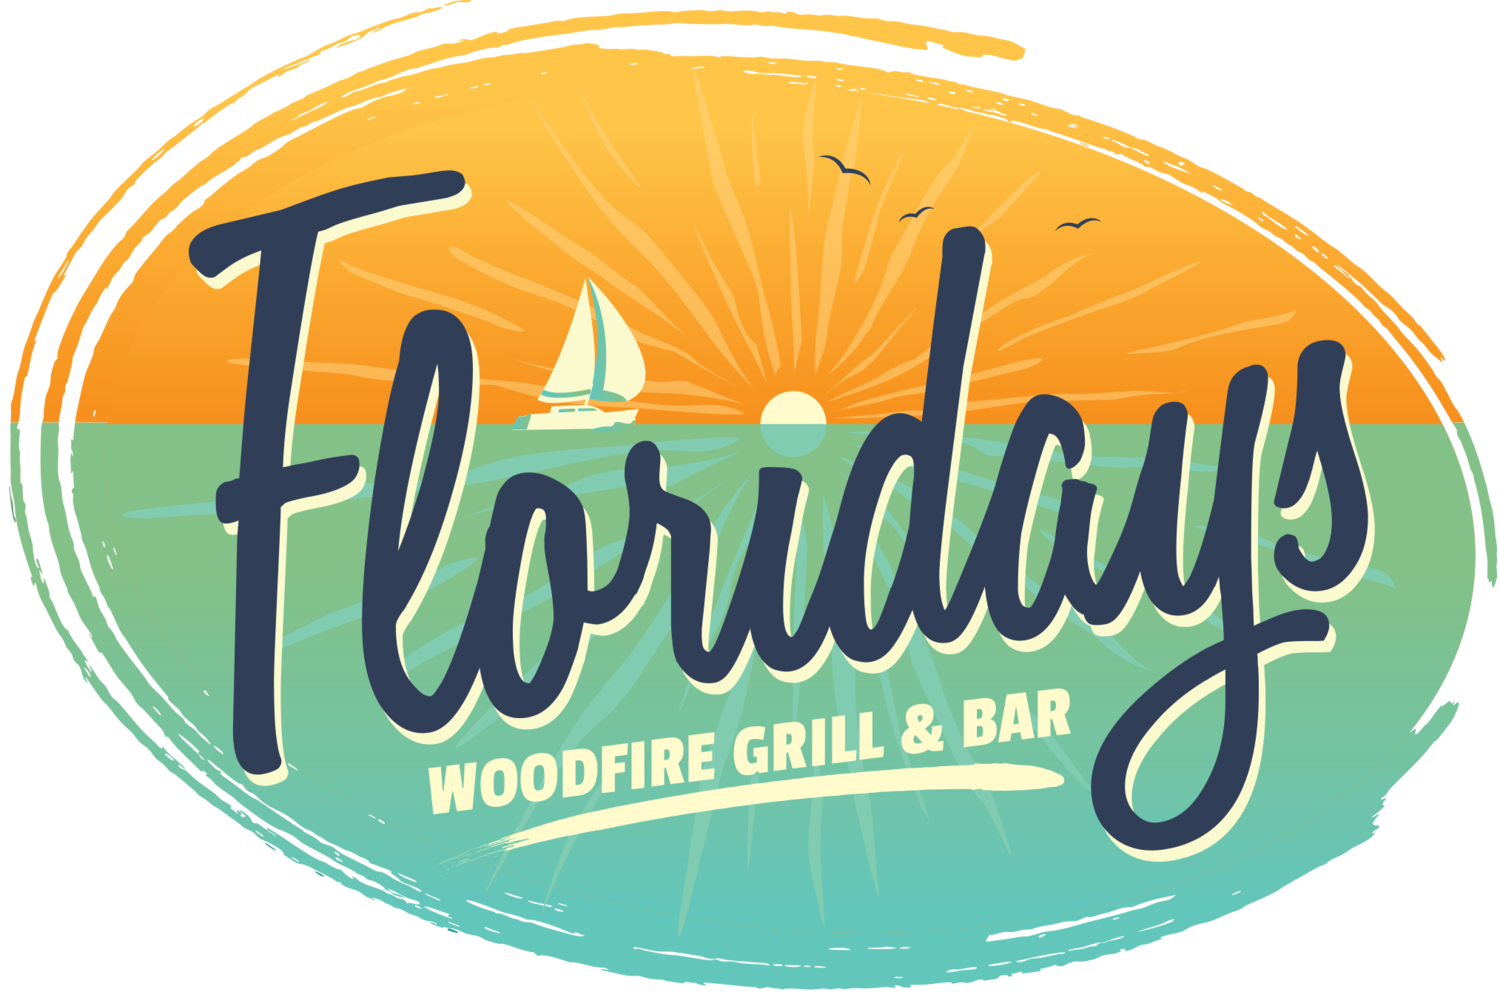 Floridays Woodfire Bar & Grill